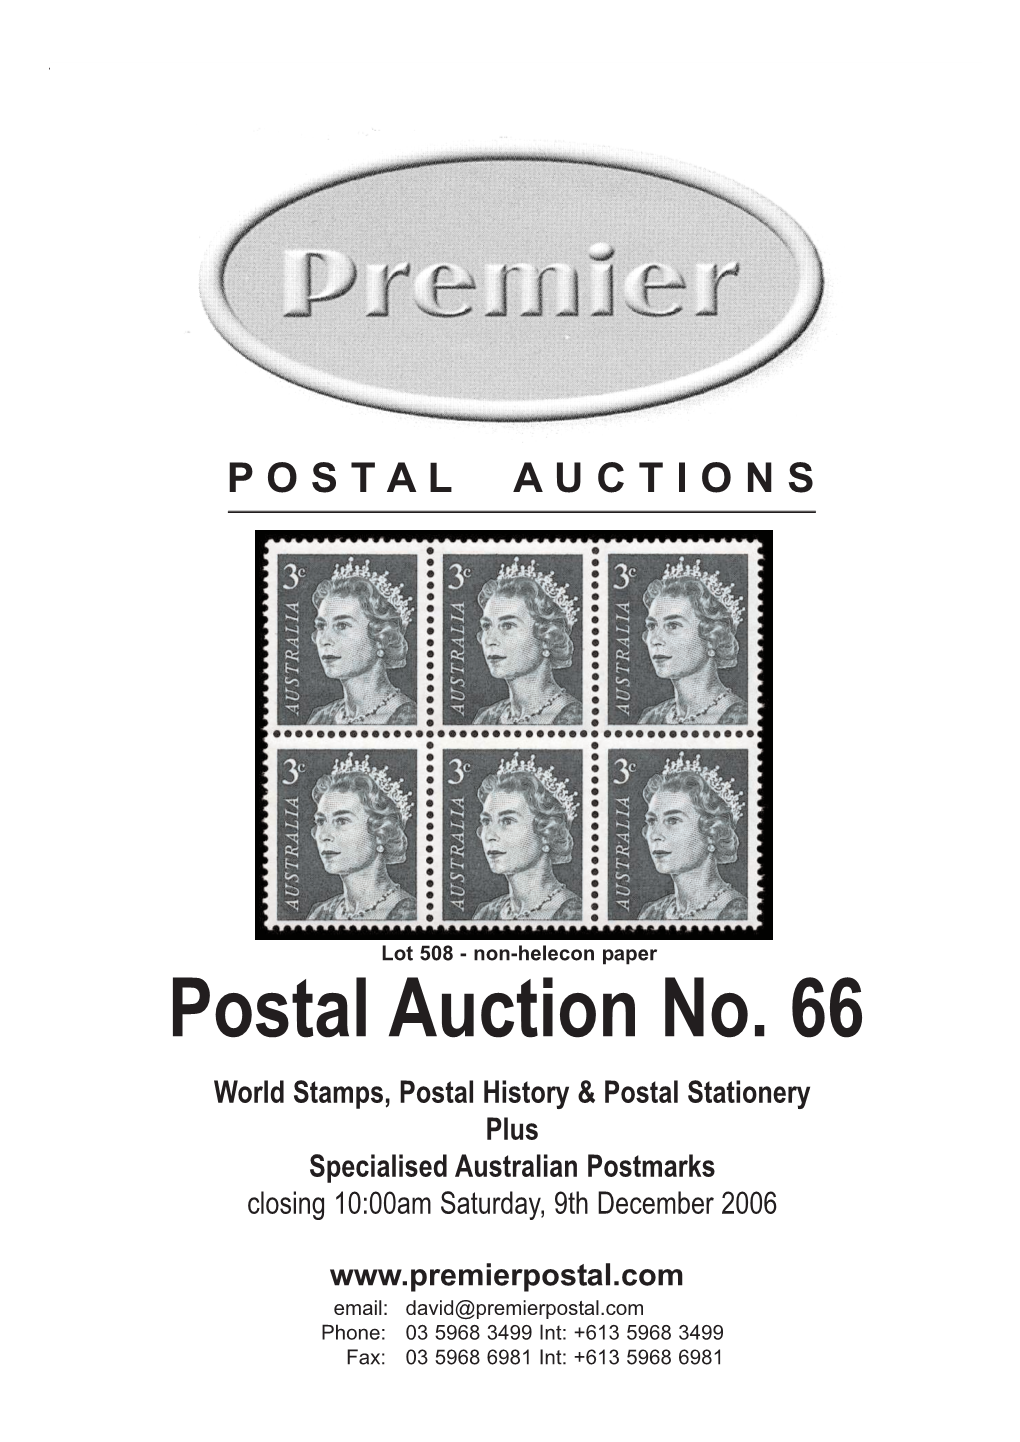 Postal Auction No. 66 World Stamps, Postal History & Postal Stationery Plus Specialised Australian Postmarks Closing 10:00Am Saturday, 9Th December 2006